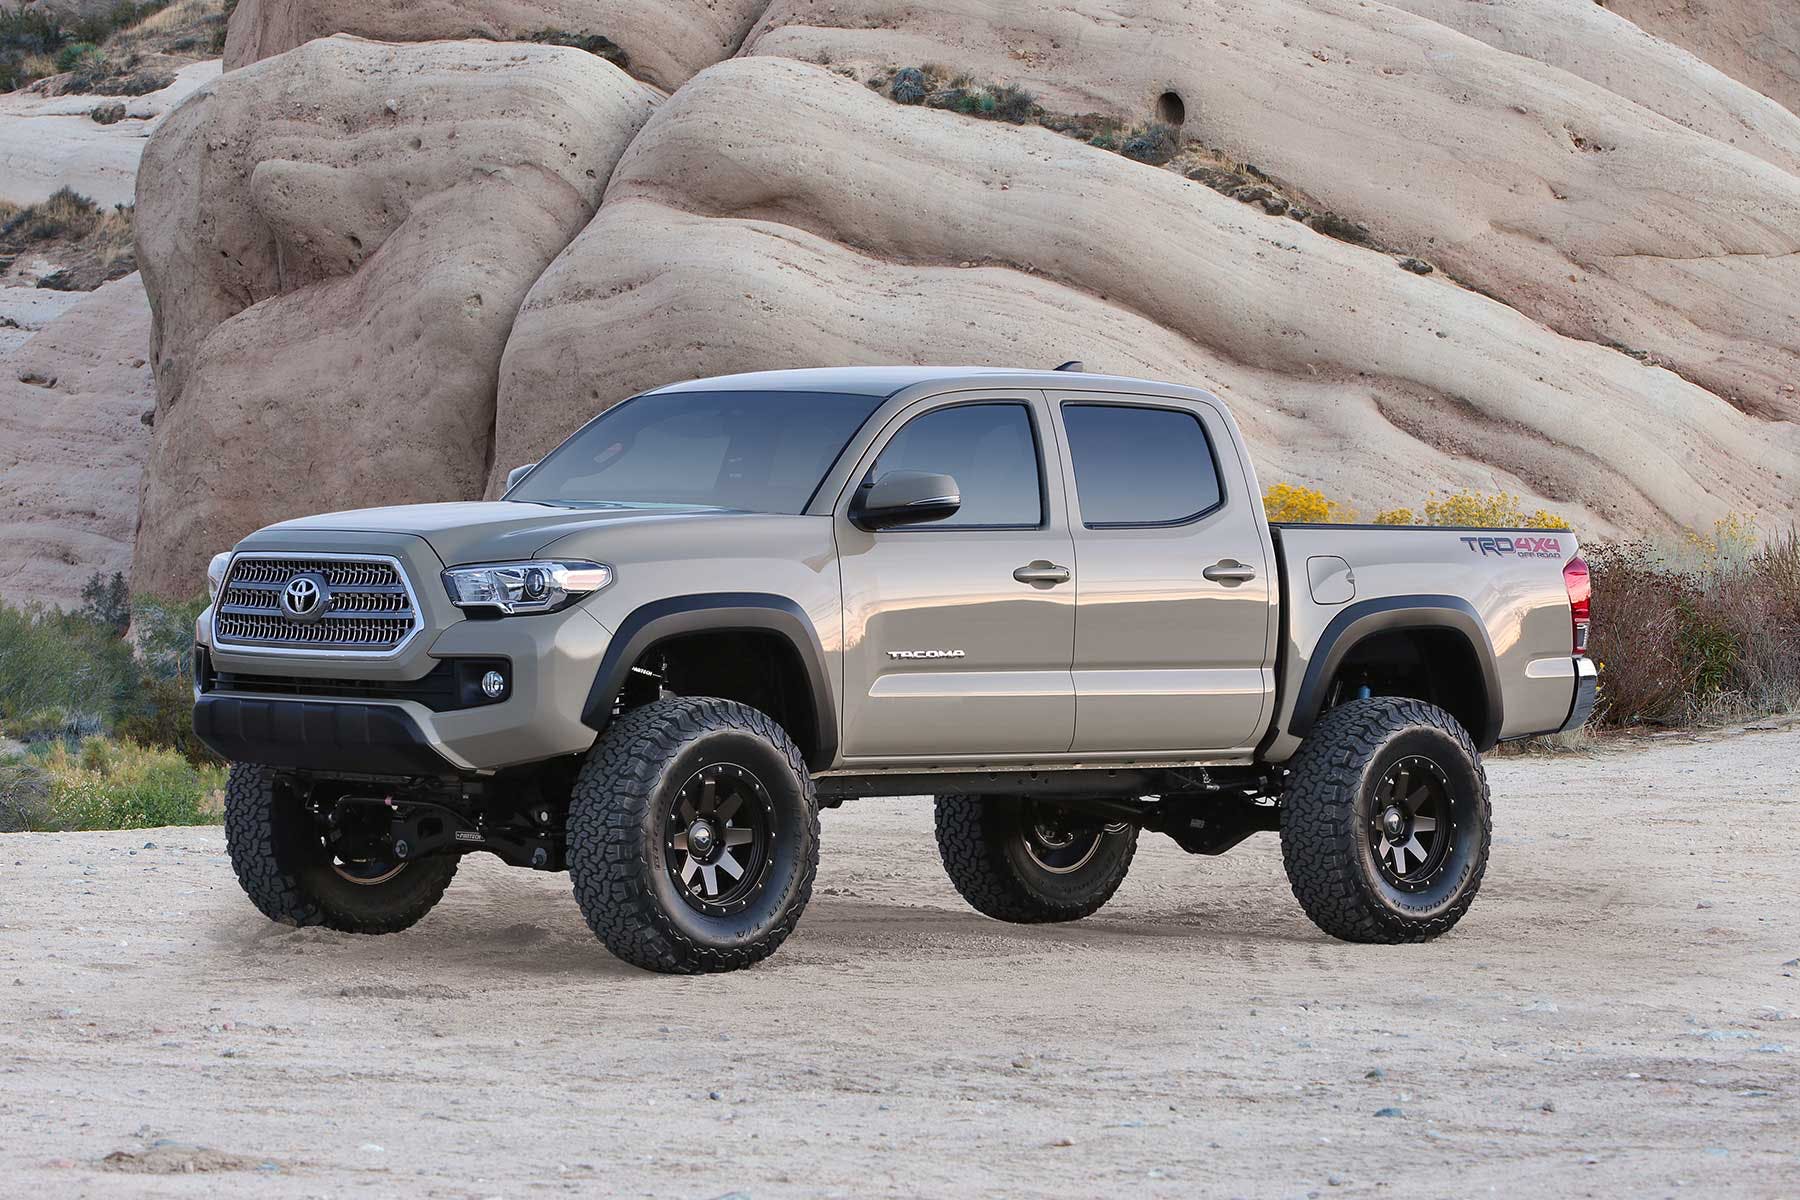 Fabtech K7047 6in. BASIC SYS 2016 TOYOTA TACOMA 4WD/2WD 6 LUG MODELS ONLY